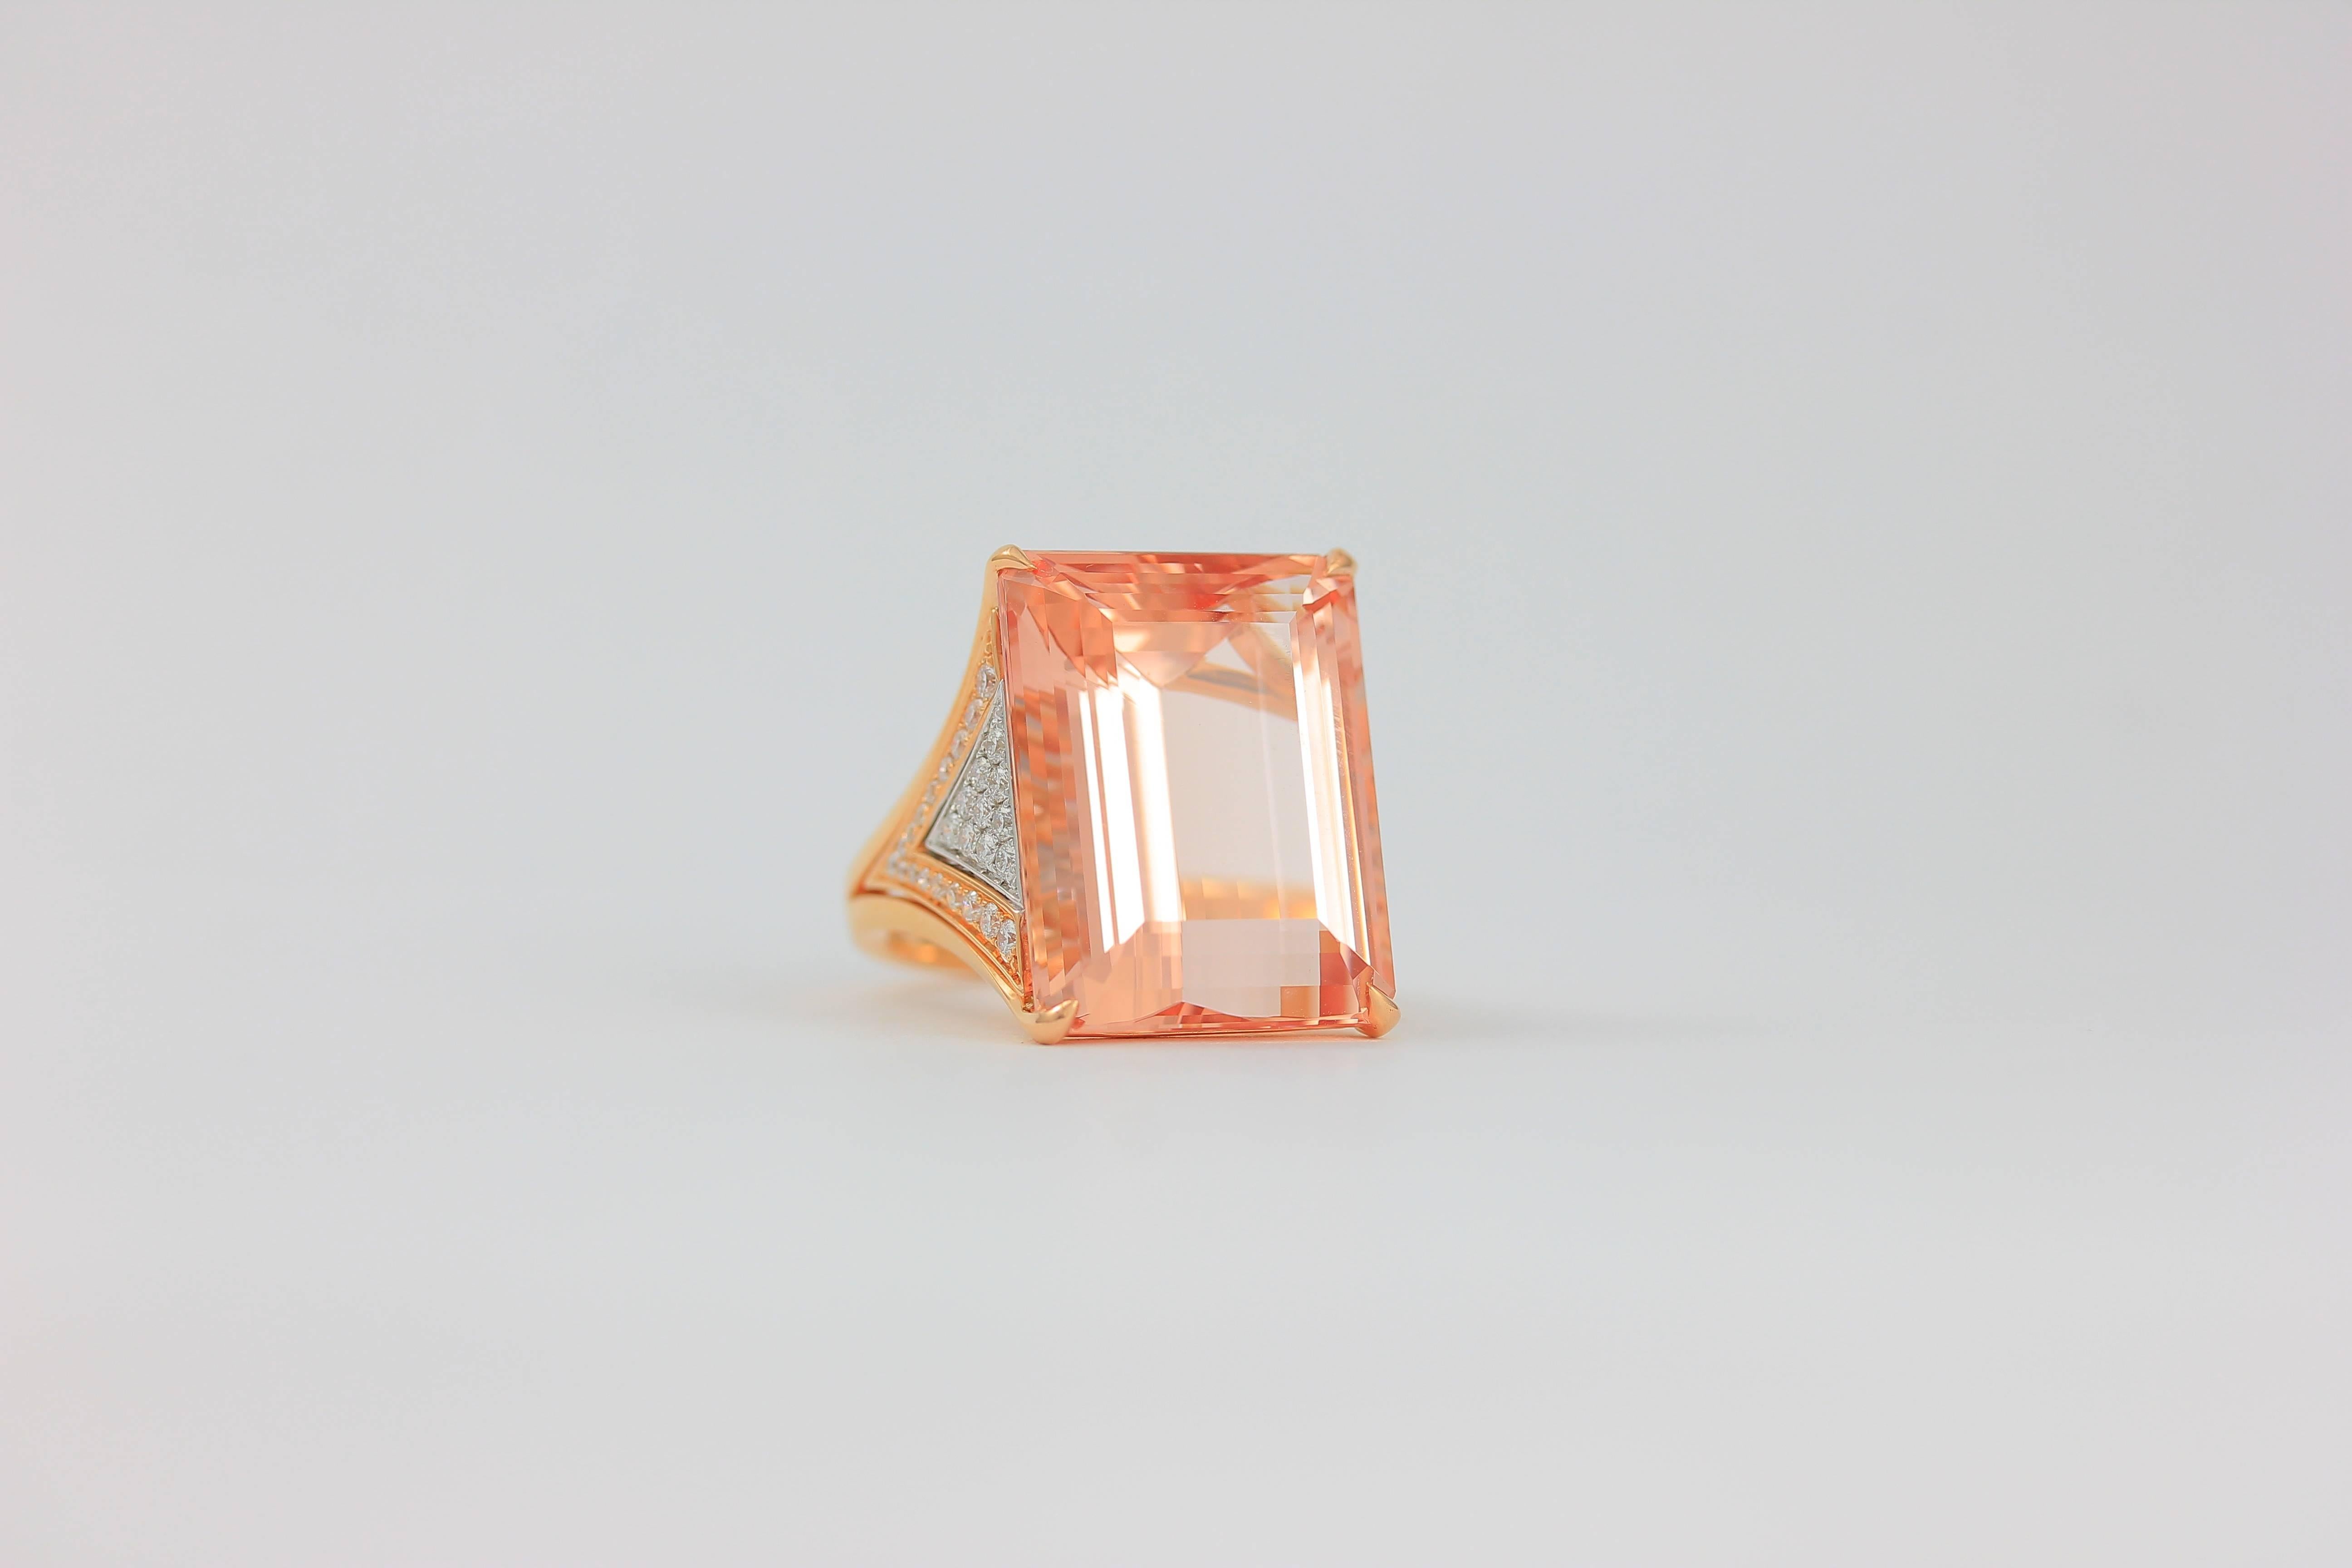 Emerald Cut Morganite and Diamonds set in Pink and White Gold

Total Diamond weight is approximately 0.56 CT
Total Watermelon Tourmaline weight is approximately  25.96 CT